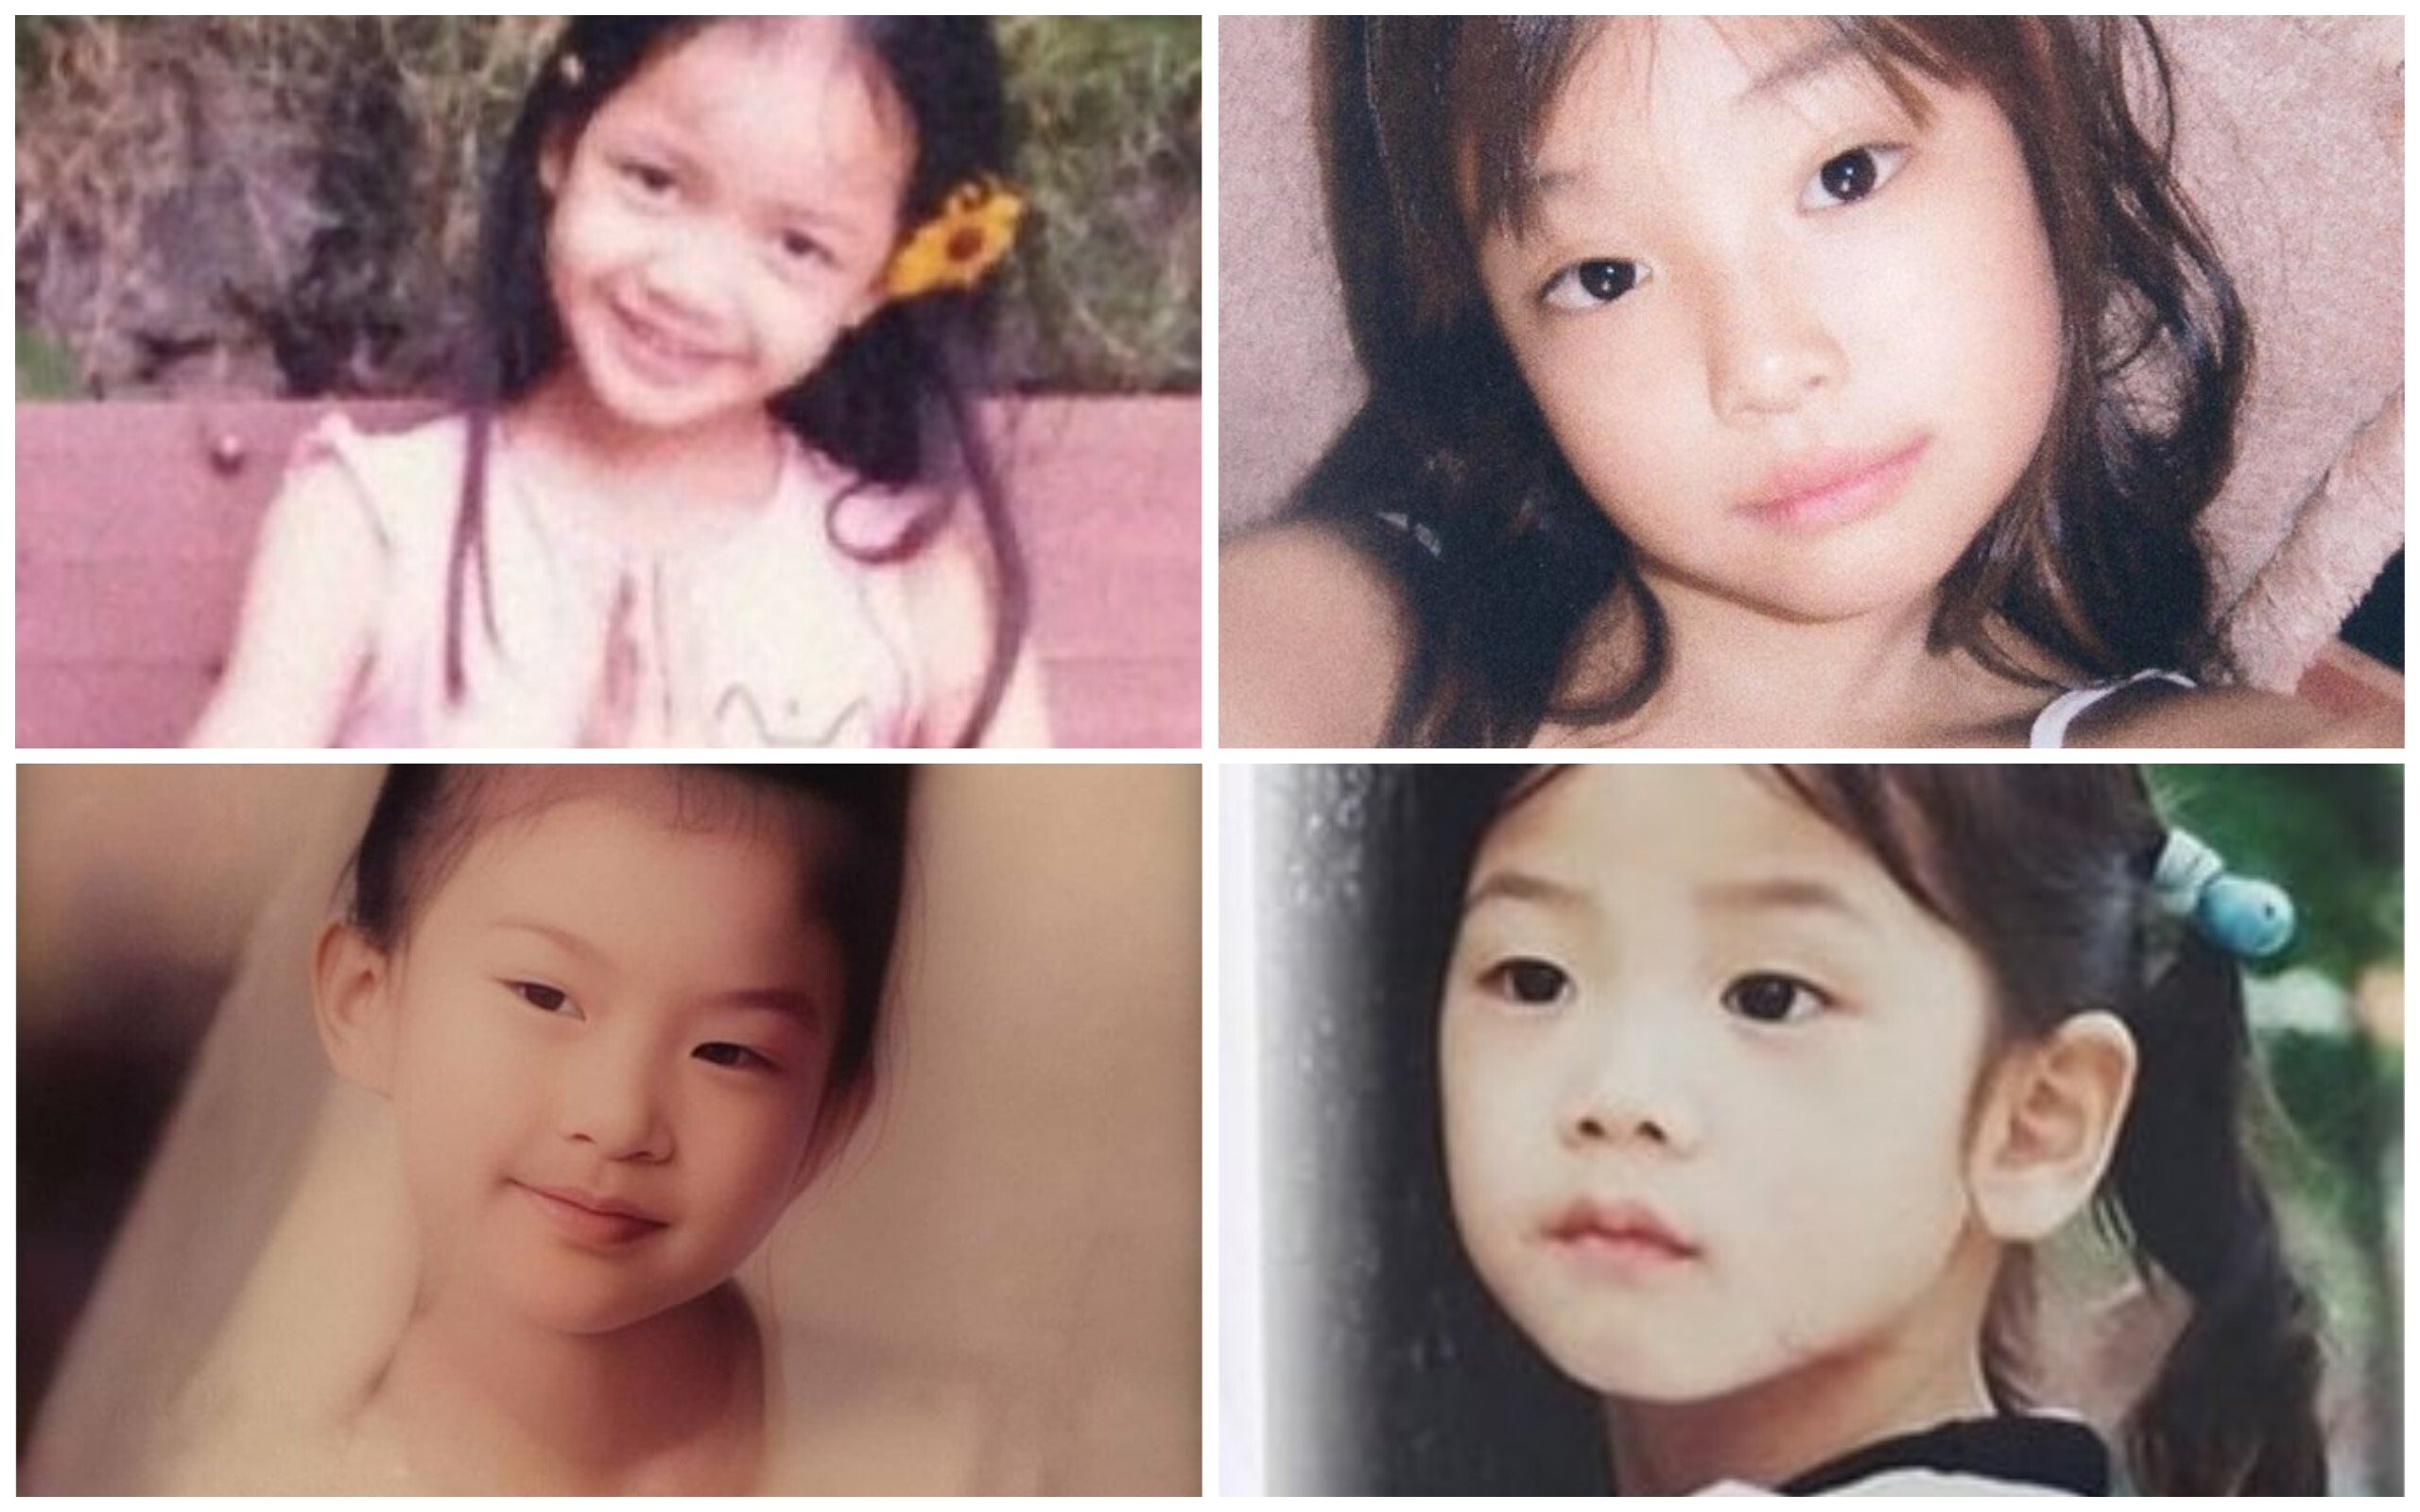 Blackpink before the fame: what Jennie, Rosé, Lisa and Jisoo were like  before they became K-pop idols | South China Morning Post